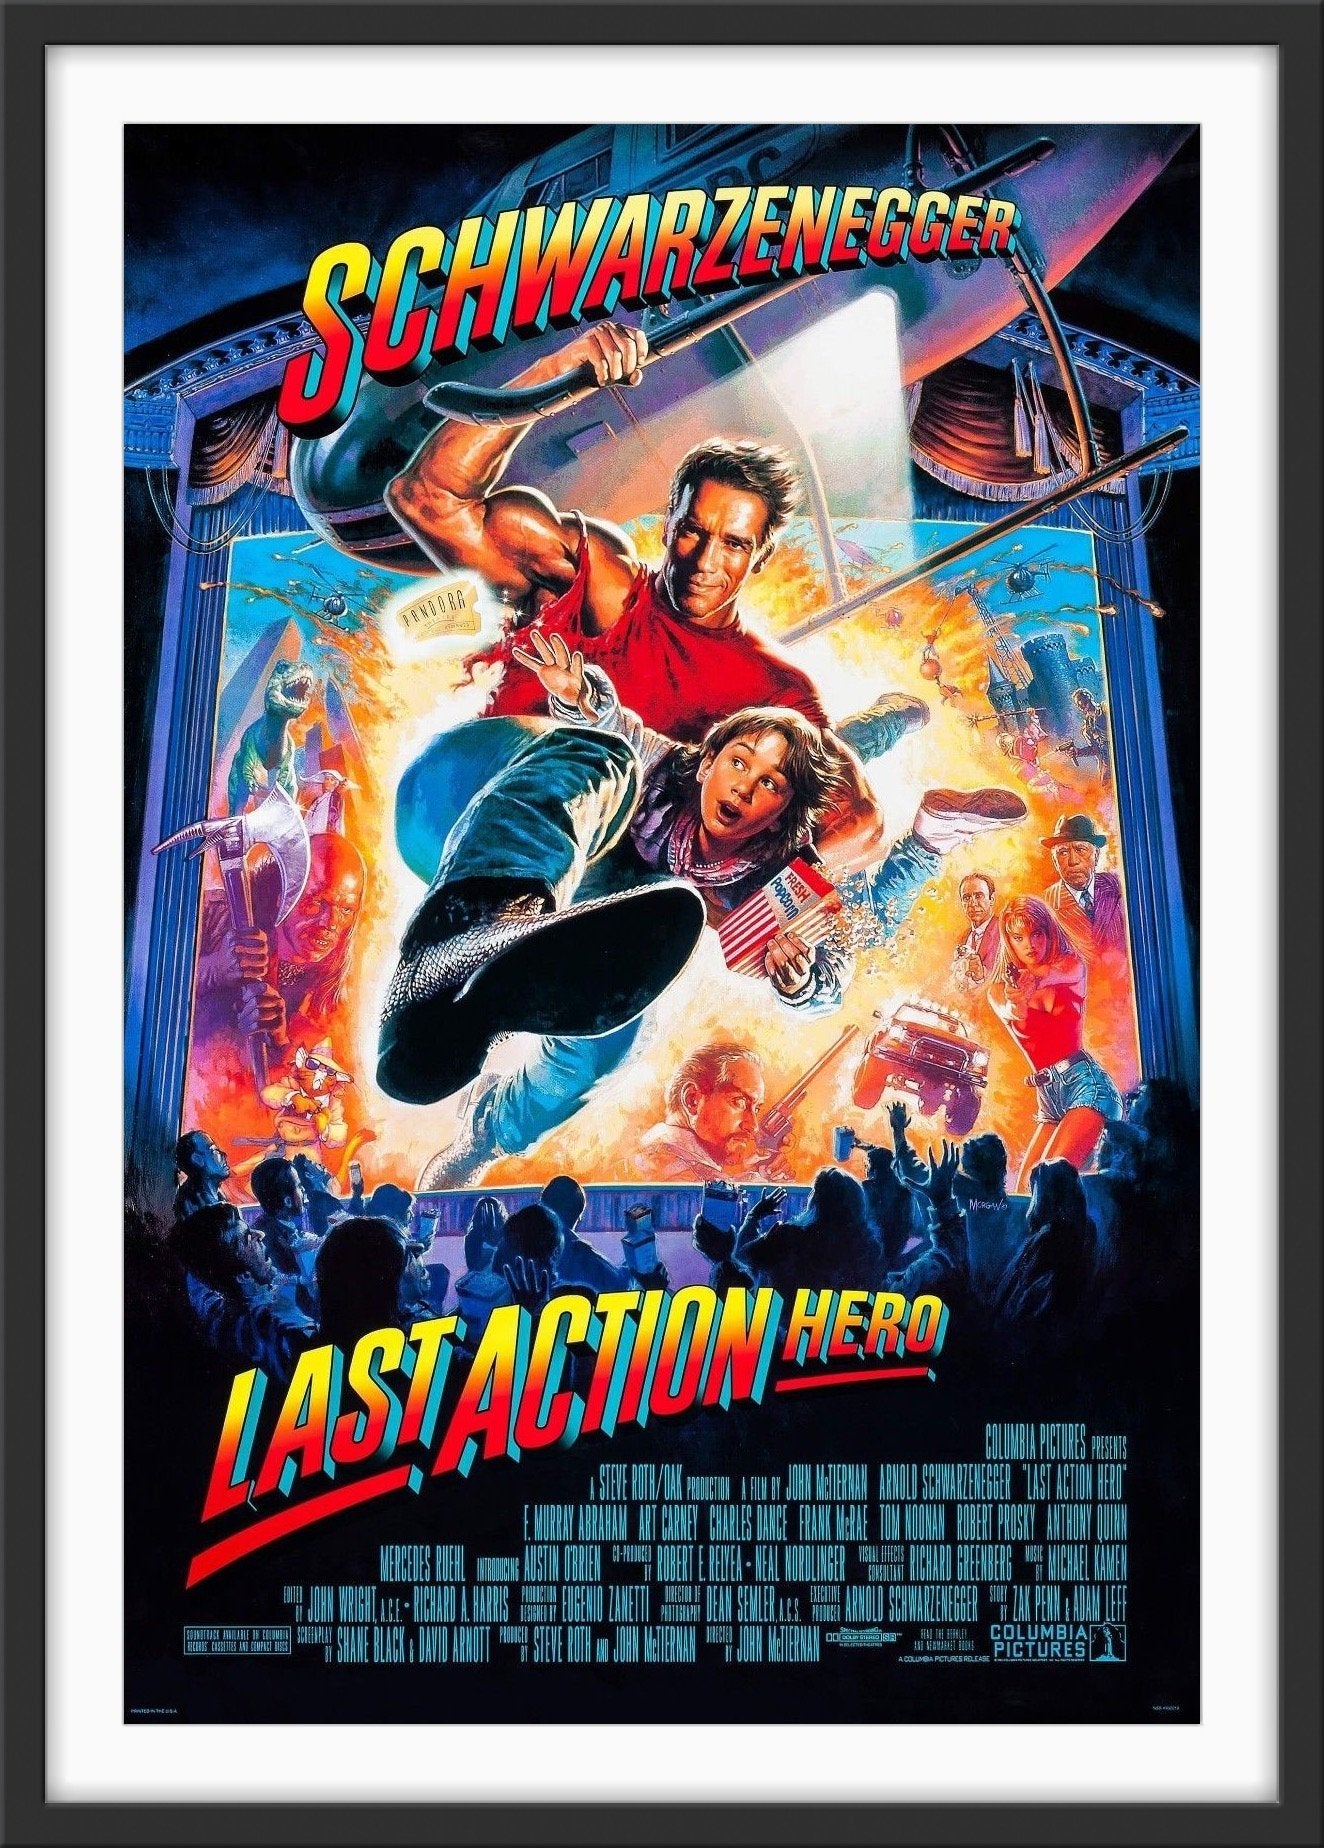 An original movie poster for the film Last Action Hero